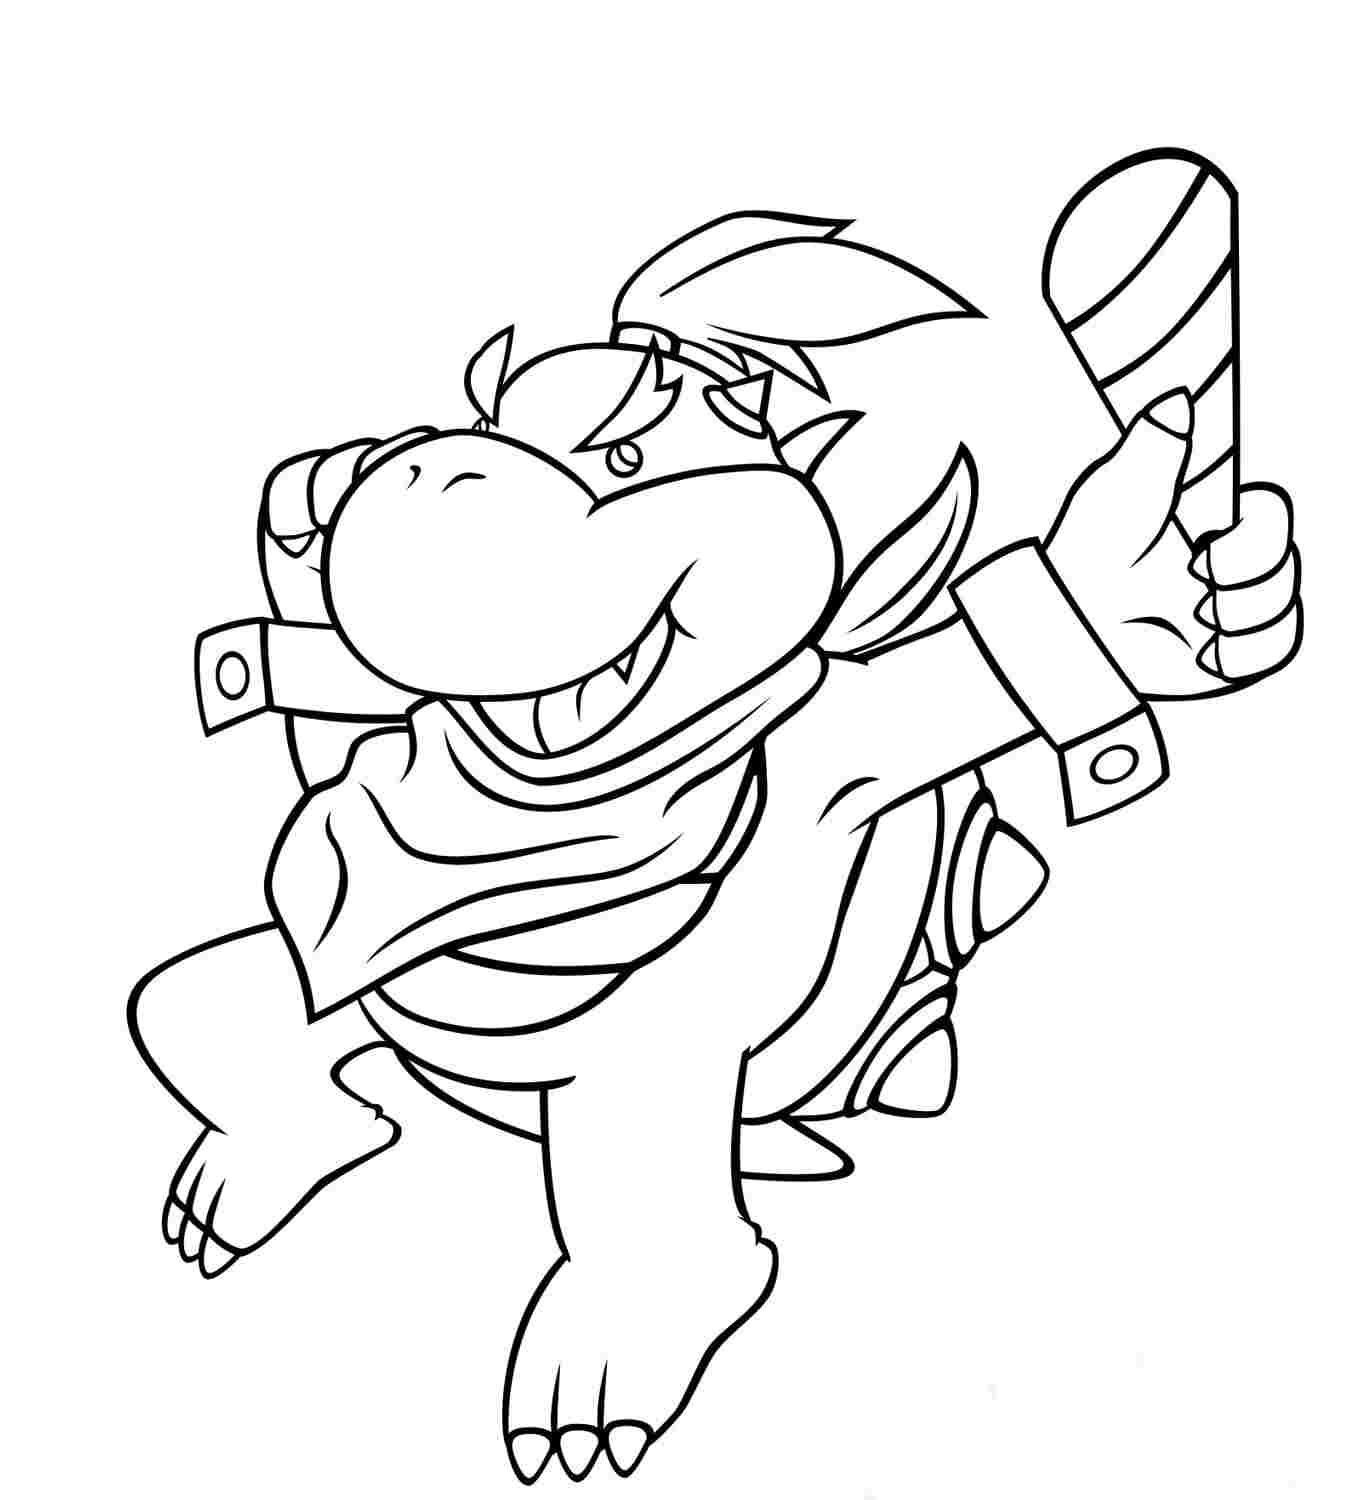 Bowser jr coloring pages printable for free download